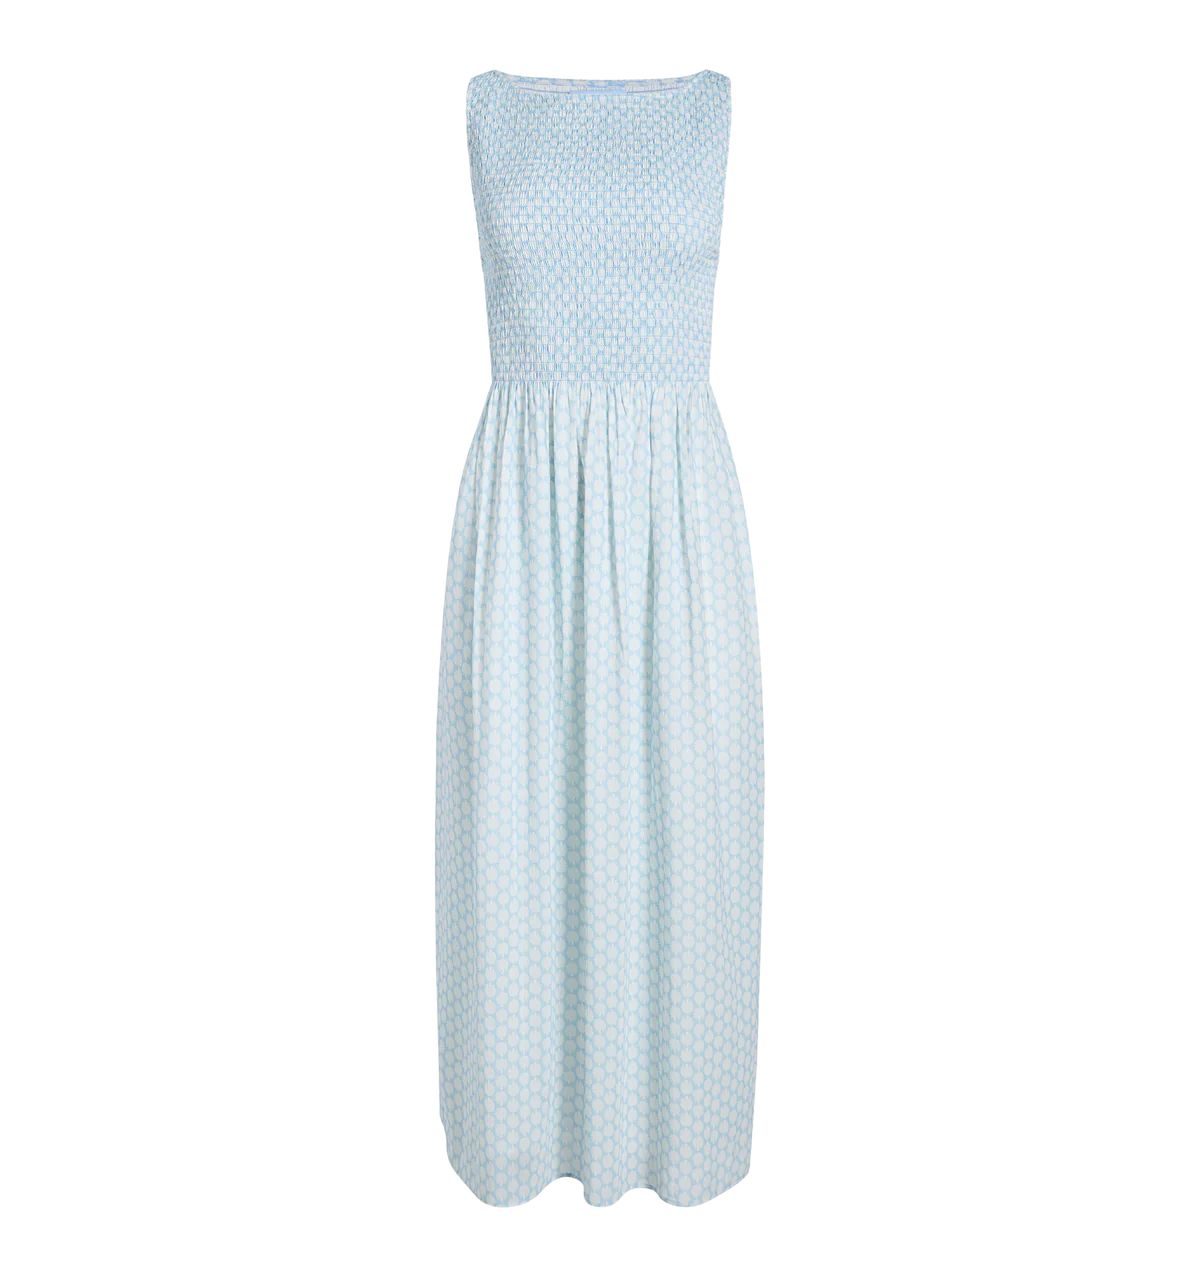 The Cosima Nap Dress in Powder Blue Baroque Shells Voile | Over The Moon